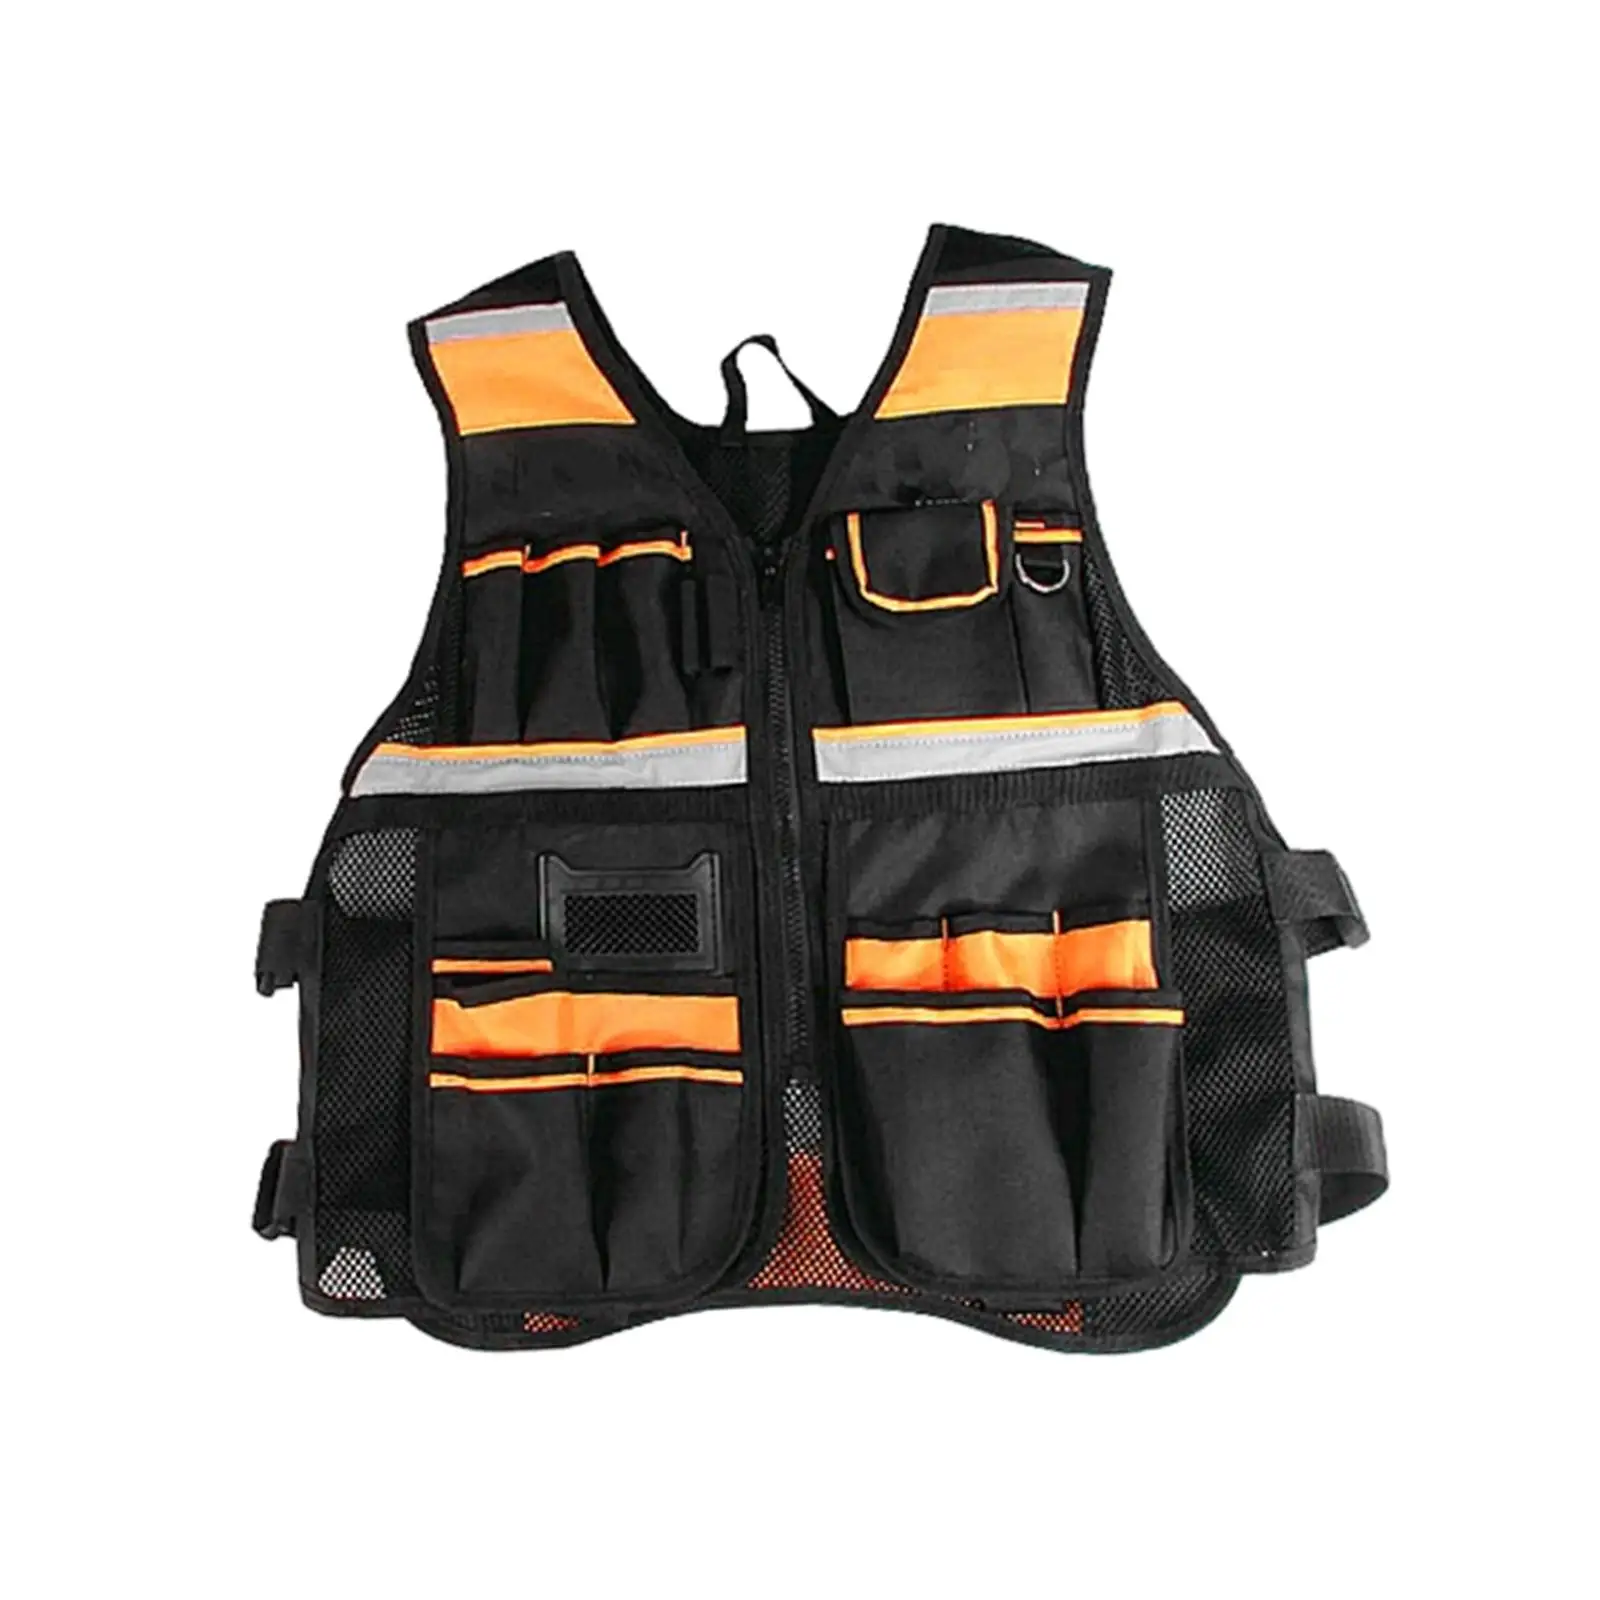 Tool Vest Reflective Electrician Carpenters Multi Pockets for Industrial Construction Site Work Gardening Household Outdoor Work